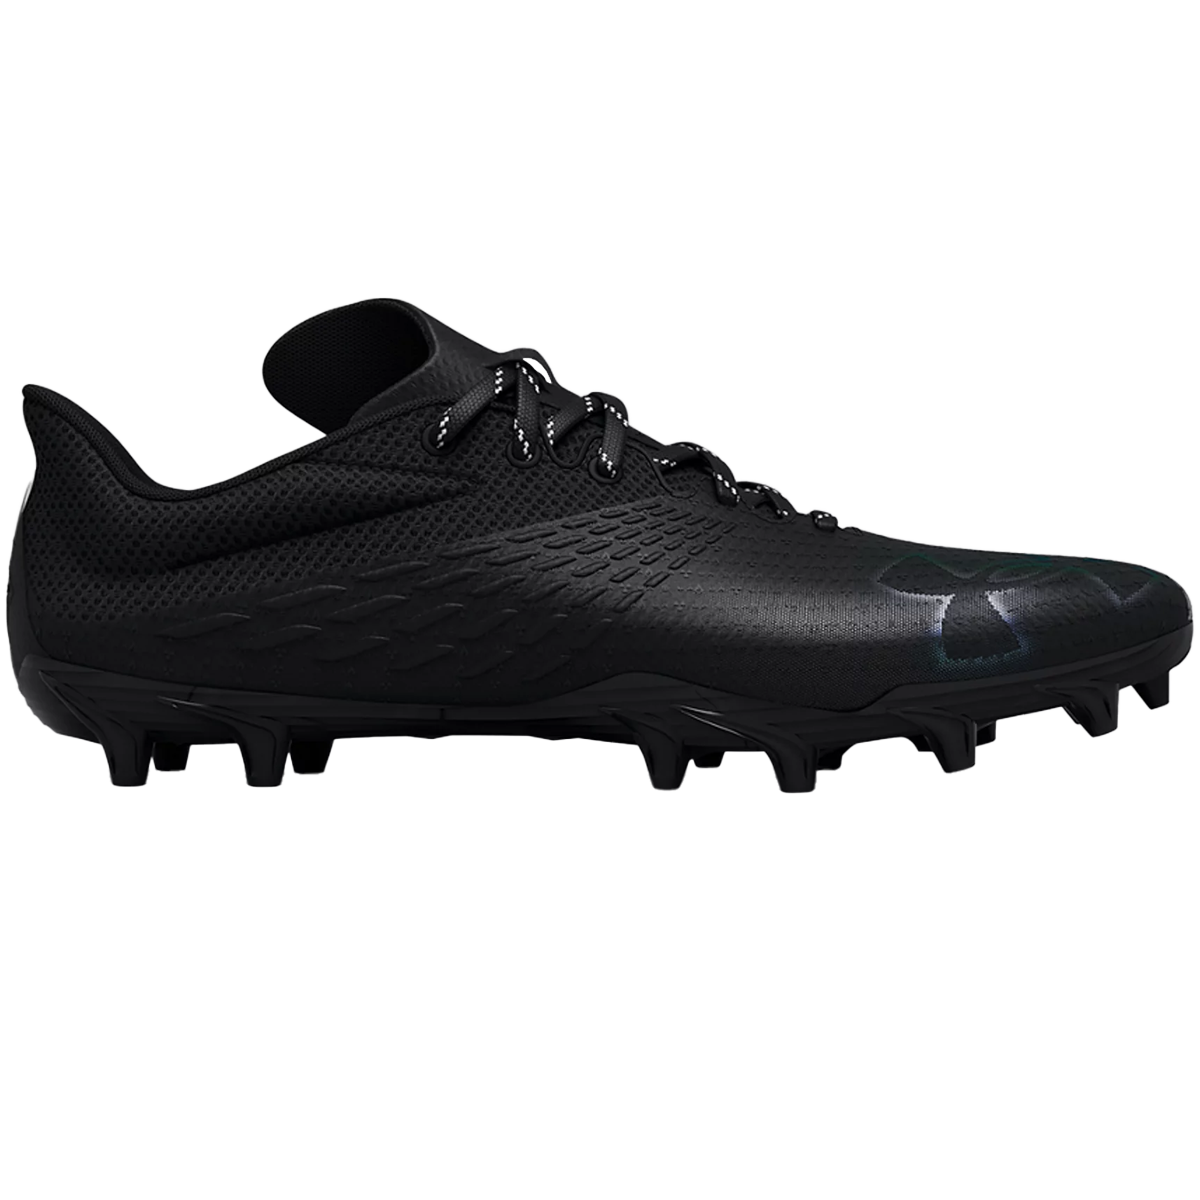 Youth Blur Select MC Football Cleats alternate view